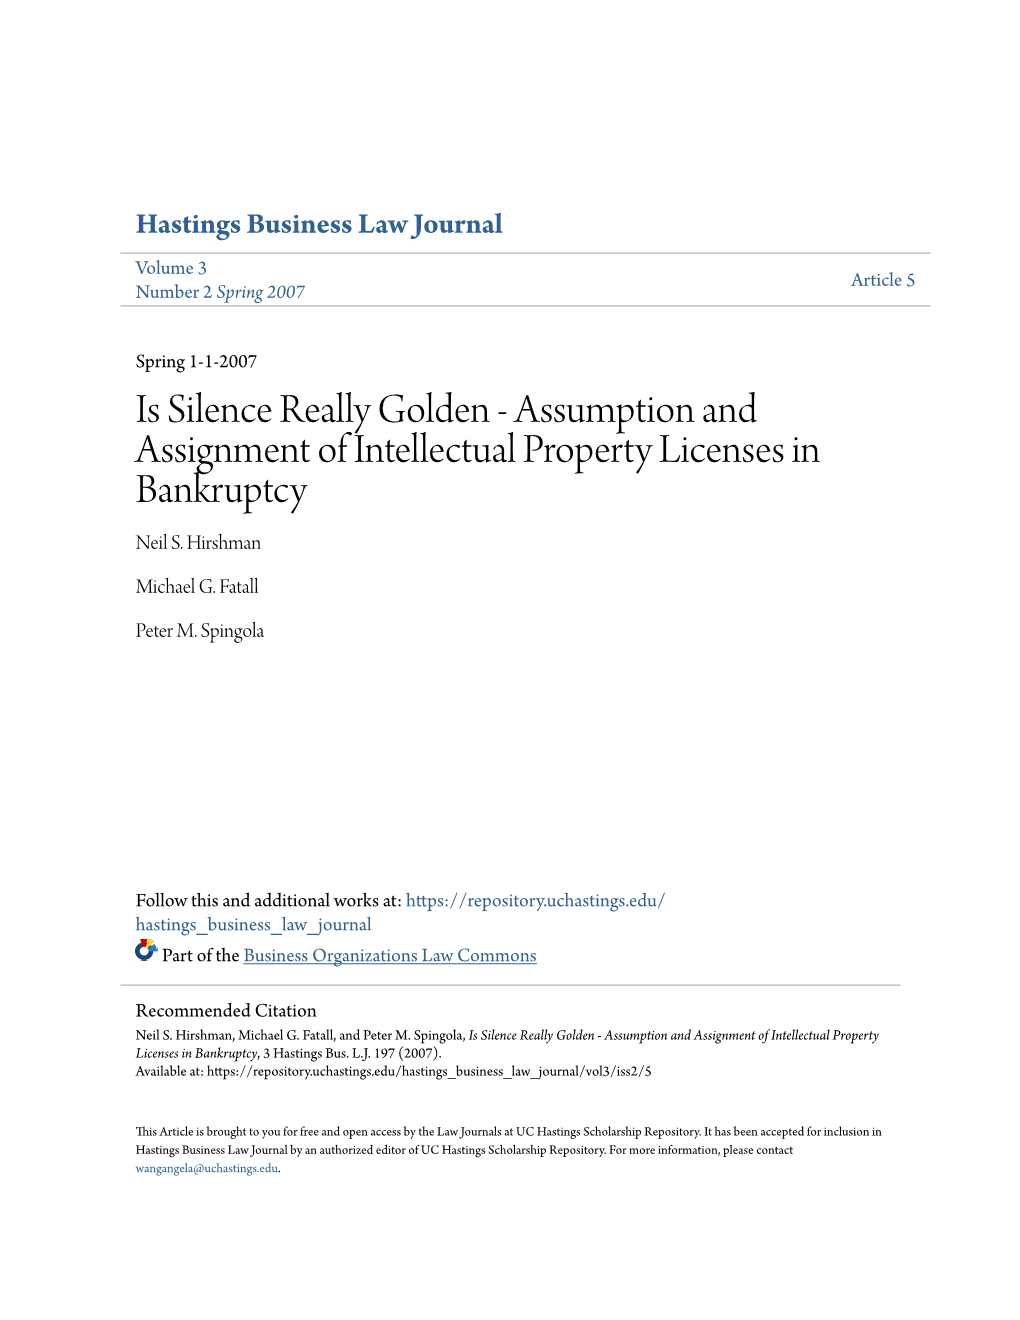 Assumption and Assignment of Intellectual Property Licenses in Bankruptcy Neil S